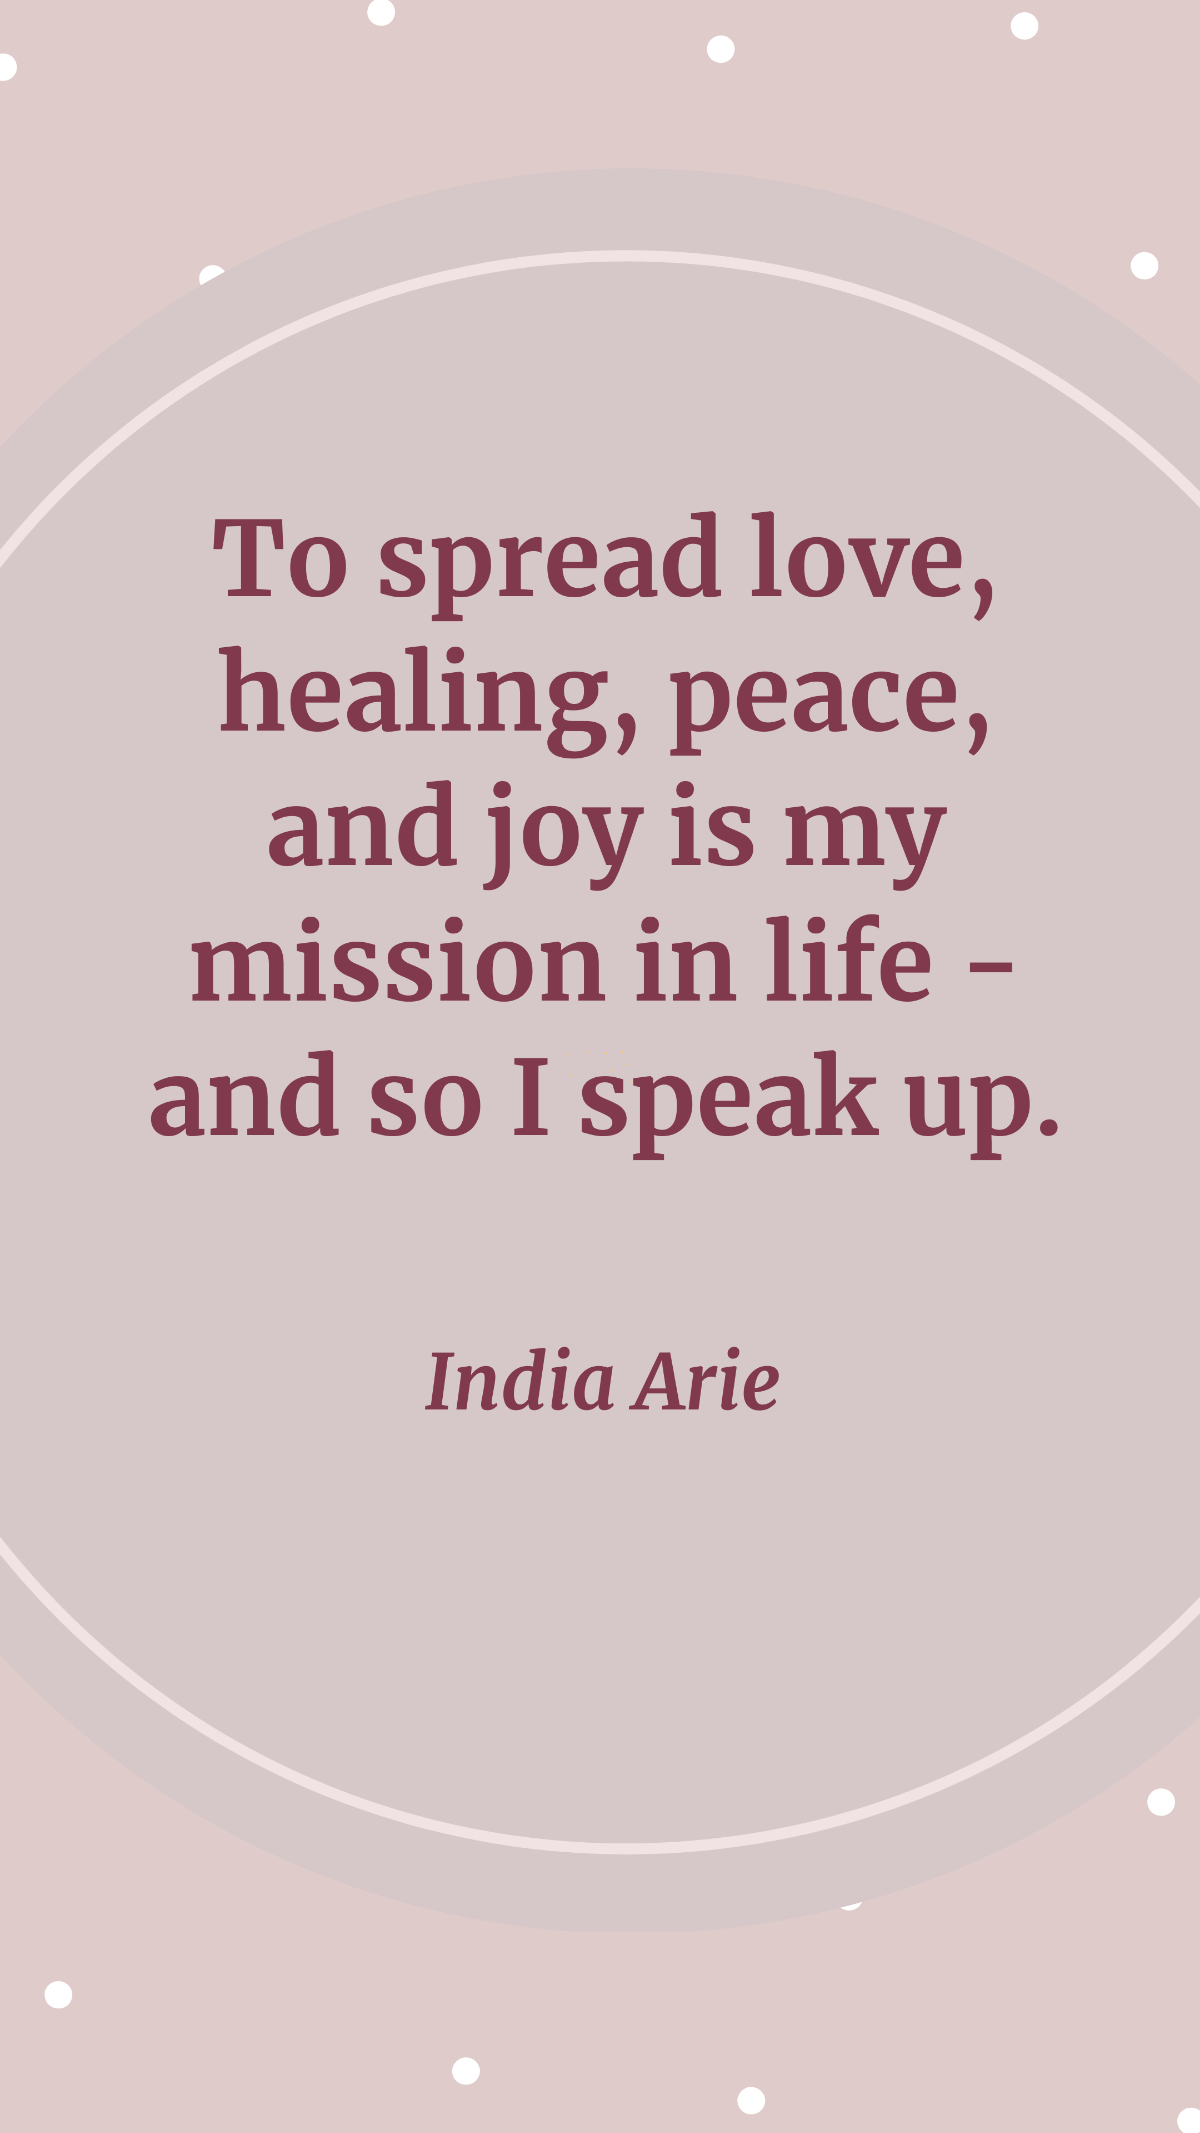 India Arie - To spread love, healing, peace, and joy is my mission in life - and so I speak up.